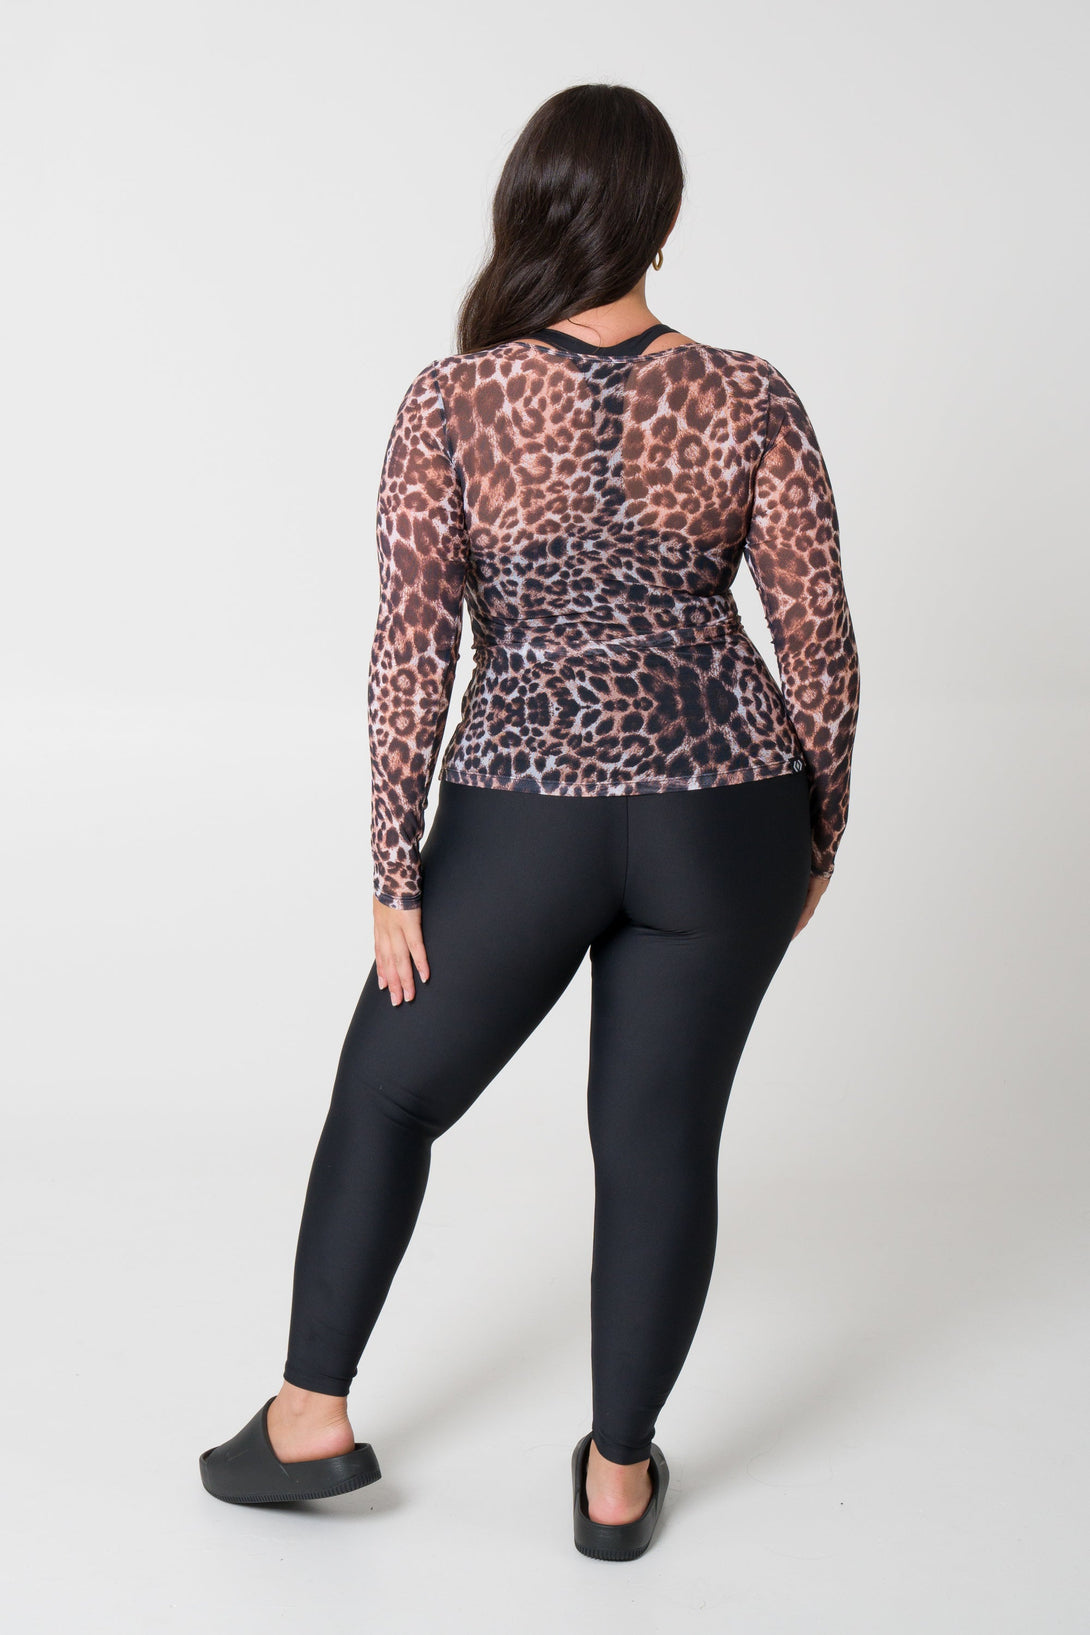 Cave Girl Net - Fitted Long Sleeve Tee-Activewear-Exoticathletica